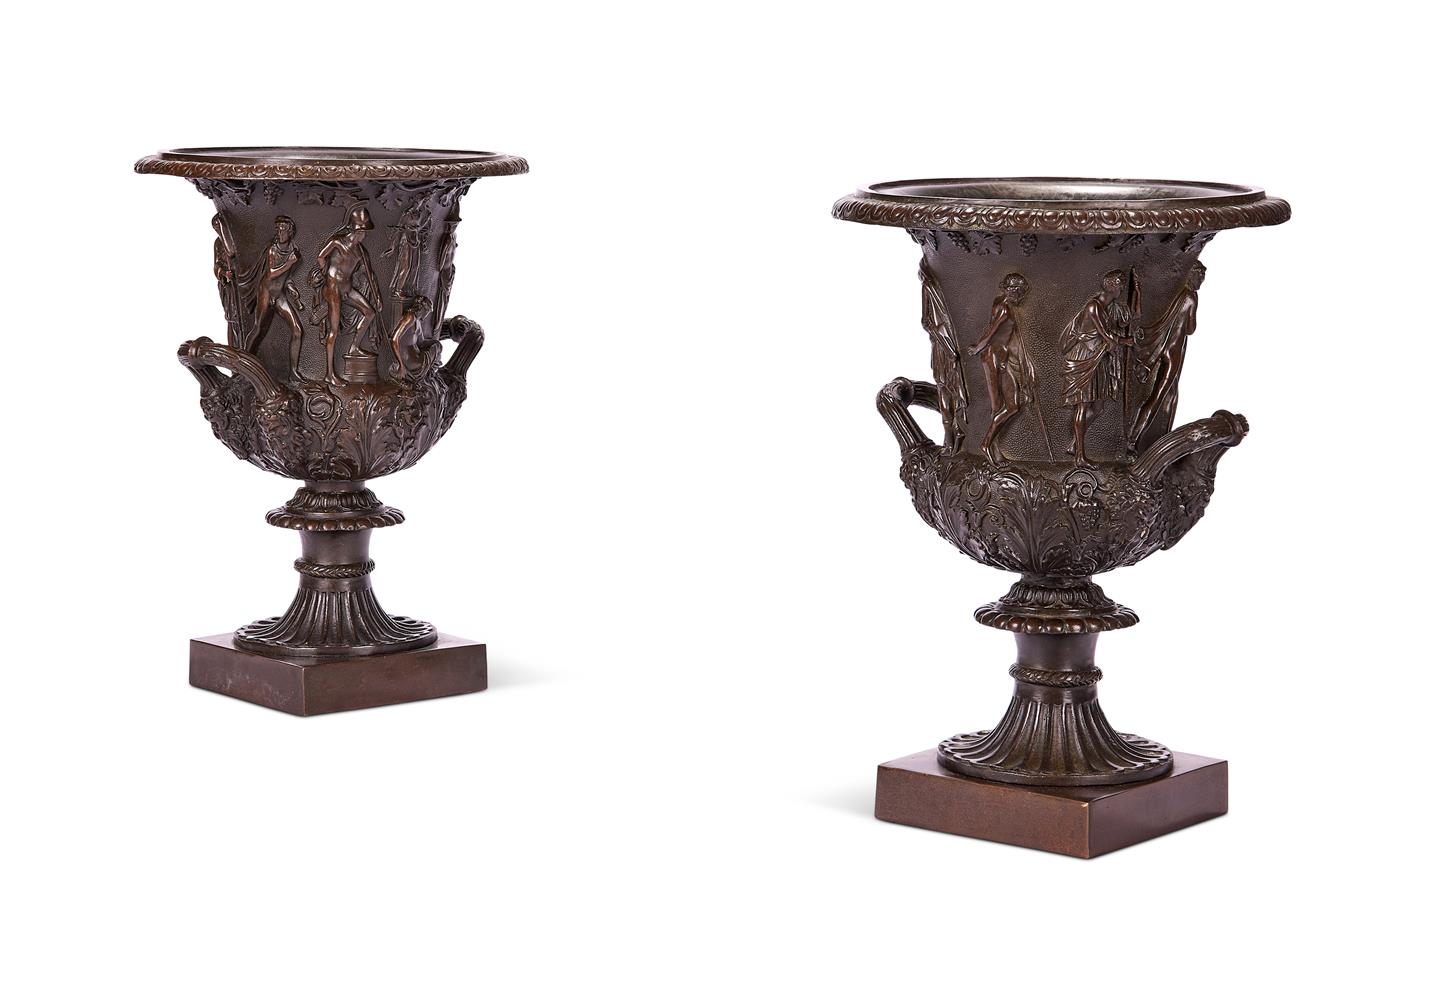 A PAIR OF GRAND TOUR BRONZE MEDICI VASES, EARLY 20TH CENTURY